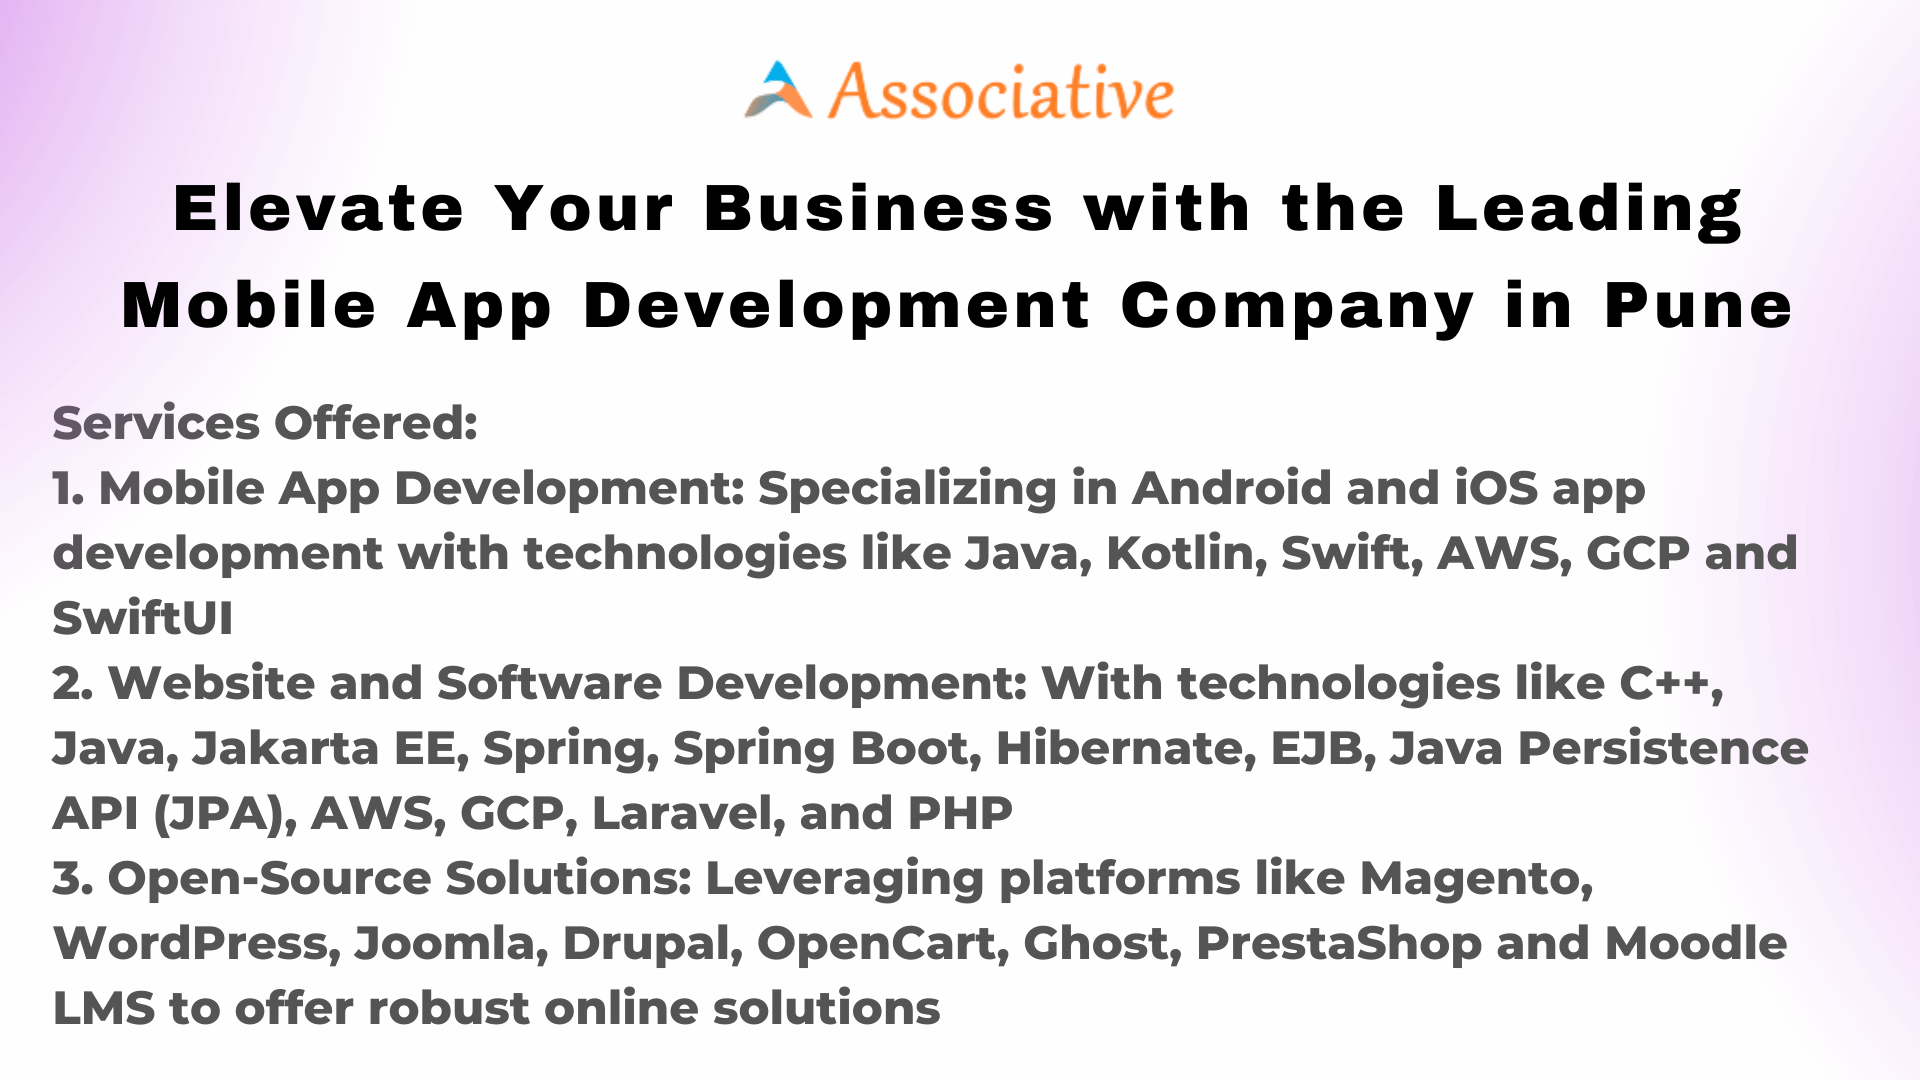 Elevate Your Business with the Leading Mobile App Development Company in Pune